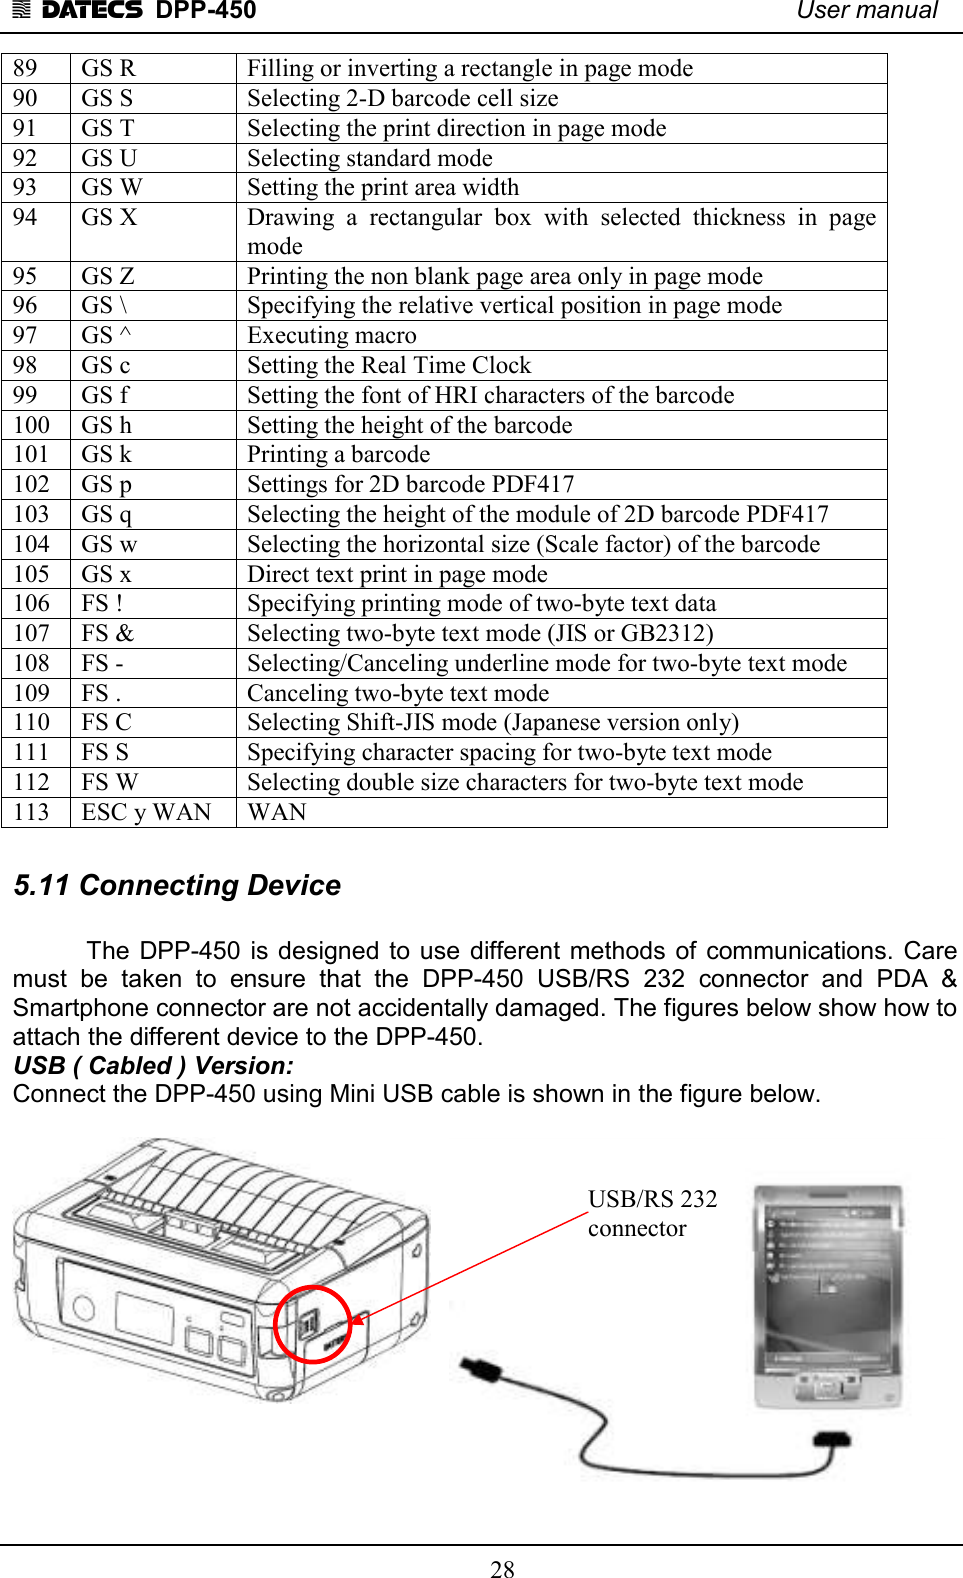 1 DATECS  DPP-450    User manual     28 89  GS R  Filling or inverting a rectangle in page mode 90  GS S  Selecting 2-D barcode cell size 91  GS T  Selecting the print direction in page mode 92  GS U  Selecting standard mode 93  GS W  Setting the print area width 94  GS X  Drawing  a  rectangular  box  with  selected  thickness  in  page mode 95  GS Z  Printing the non blank page area only in page mode 96  GS \  Specifying the relative vertical position in page mode 97  GS ^  Executing macro 98  GS c  Setting the Real Time Clock 99  GS f  Setting the font of HRI characters of the barcode 100  GS h  Setting the height of the barcode 101  GS k  Printing a barcode 102  GS p  Settings for 2D barcode PDF417 103  GS q  Selecting the height of the module of 2D barcode PDF417 104  GS w  Selecting the horizontal size (Scale factor) of the barcode 105  GS x  Direct text print in page mode 106  FS !  Specifying printing mode of two-byte text data 107  FS &amp;  Selecting two-byte text mode (JIS or GB2312) 108  FS -  Selecting/Canceling underline mode for two-byte text mode 109  FS .  Canceling two-byte text mode 110  FS C  Selecting Shift-JIS mode (Japanese version only) 111  FS S  Specifying character spacing for two-byte text mode 112  FS W  Selecting double size characters for two-byte text mode 113  ESC y WAN  WAN  5.11 Connecting Device   The  DPP-450  is designed to use  different methods of  communications.  Care must  be  taken  to  ensure  that  the  DPP-450  USB/RS  232  connector  and  PDA  &amp; Smartphone connector are not accidentally damaged. The figures below show how to attach the different device to the DPP-450. USB ( Cabled ) Version:  Connect the DPP-450 using Mini USB cable is shown in the figure below.   USB/RS 232 connector 